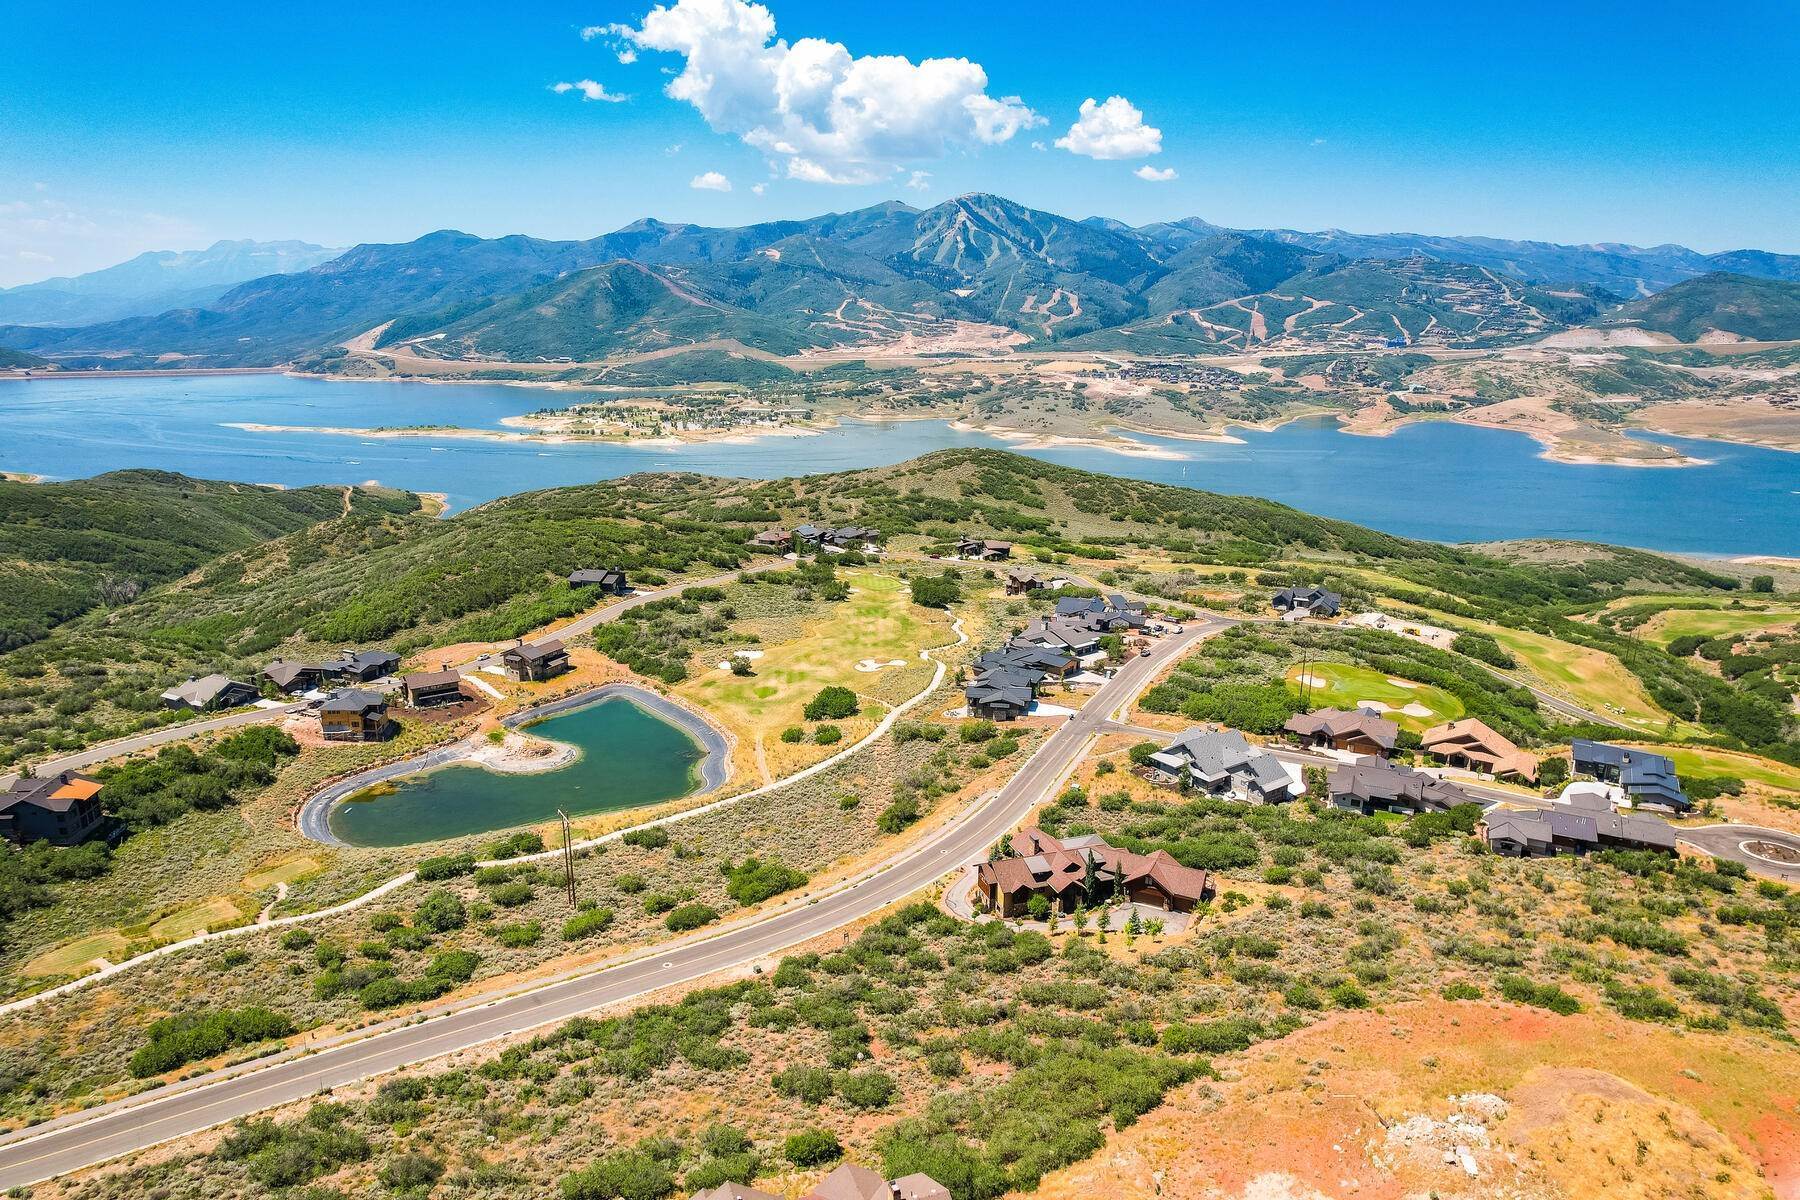 Land for Sale at Breathtaking Mountain, Water Views and Dedicated Open Space 10 Minutes to Park C 1305 E Longview Dr, Lot 11 Heber City, Utah 84032 United States